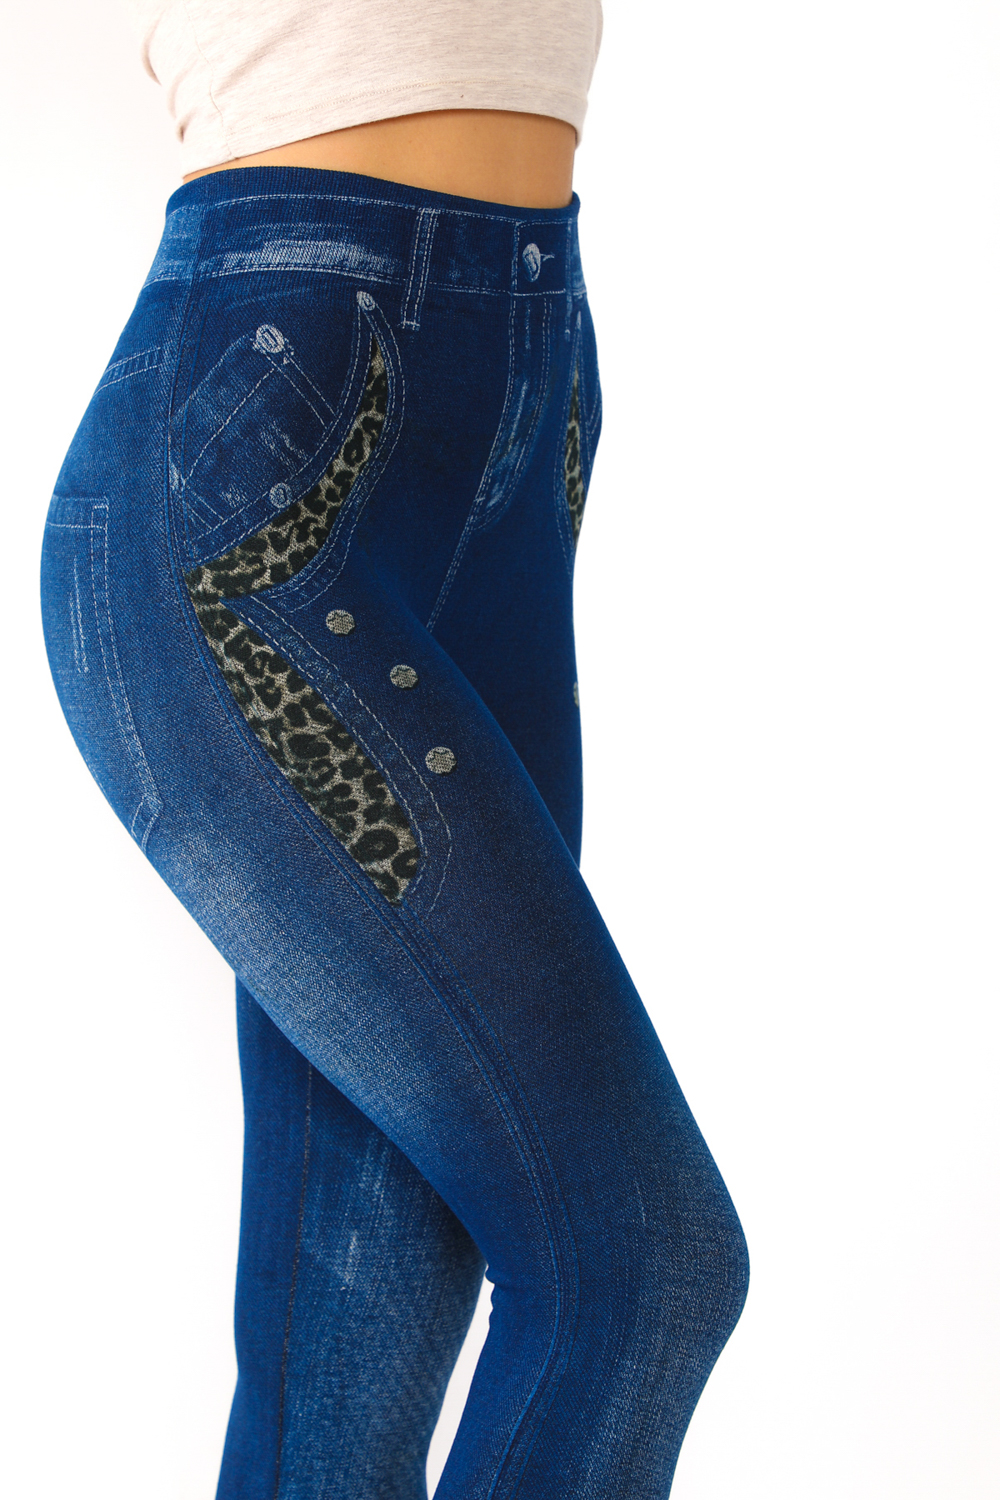 Stretchy denim green leopard print side stripe jeggings featuring pull on  style with front and back pockets. - Pack Breakdown: 6pcs / pack - Sizes:  2S / 2M / 2L - Inseam